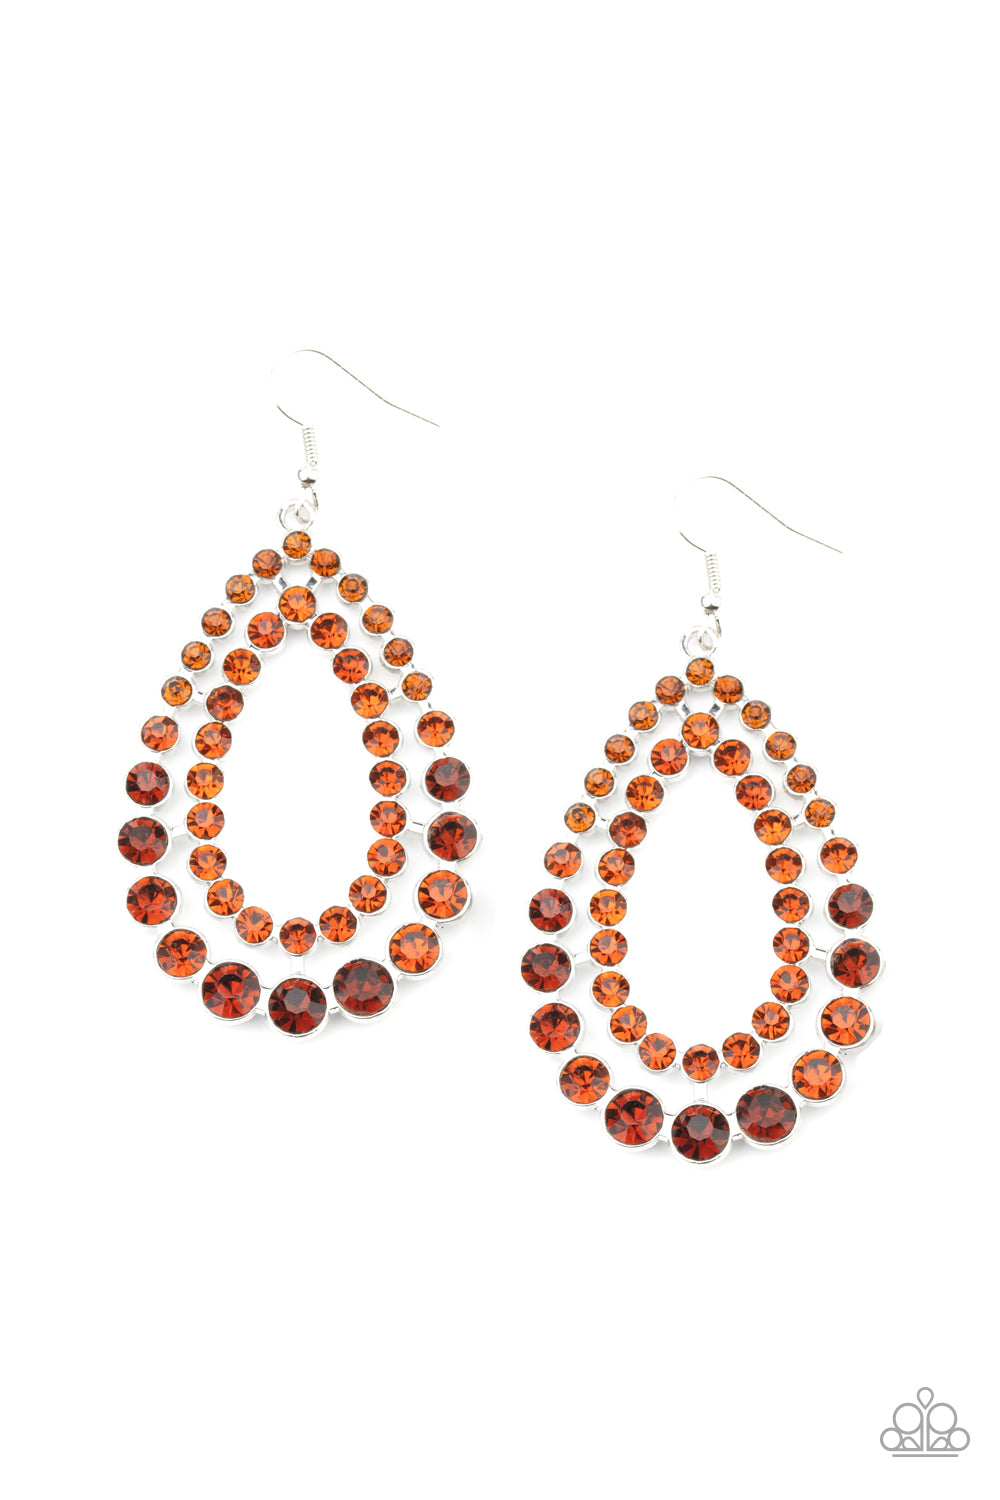 Paparazzi Glacial Glaze - Brown Earrings - A Finishing Touch Jewelry